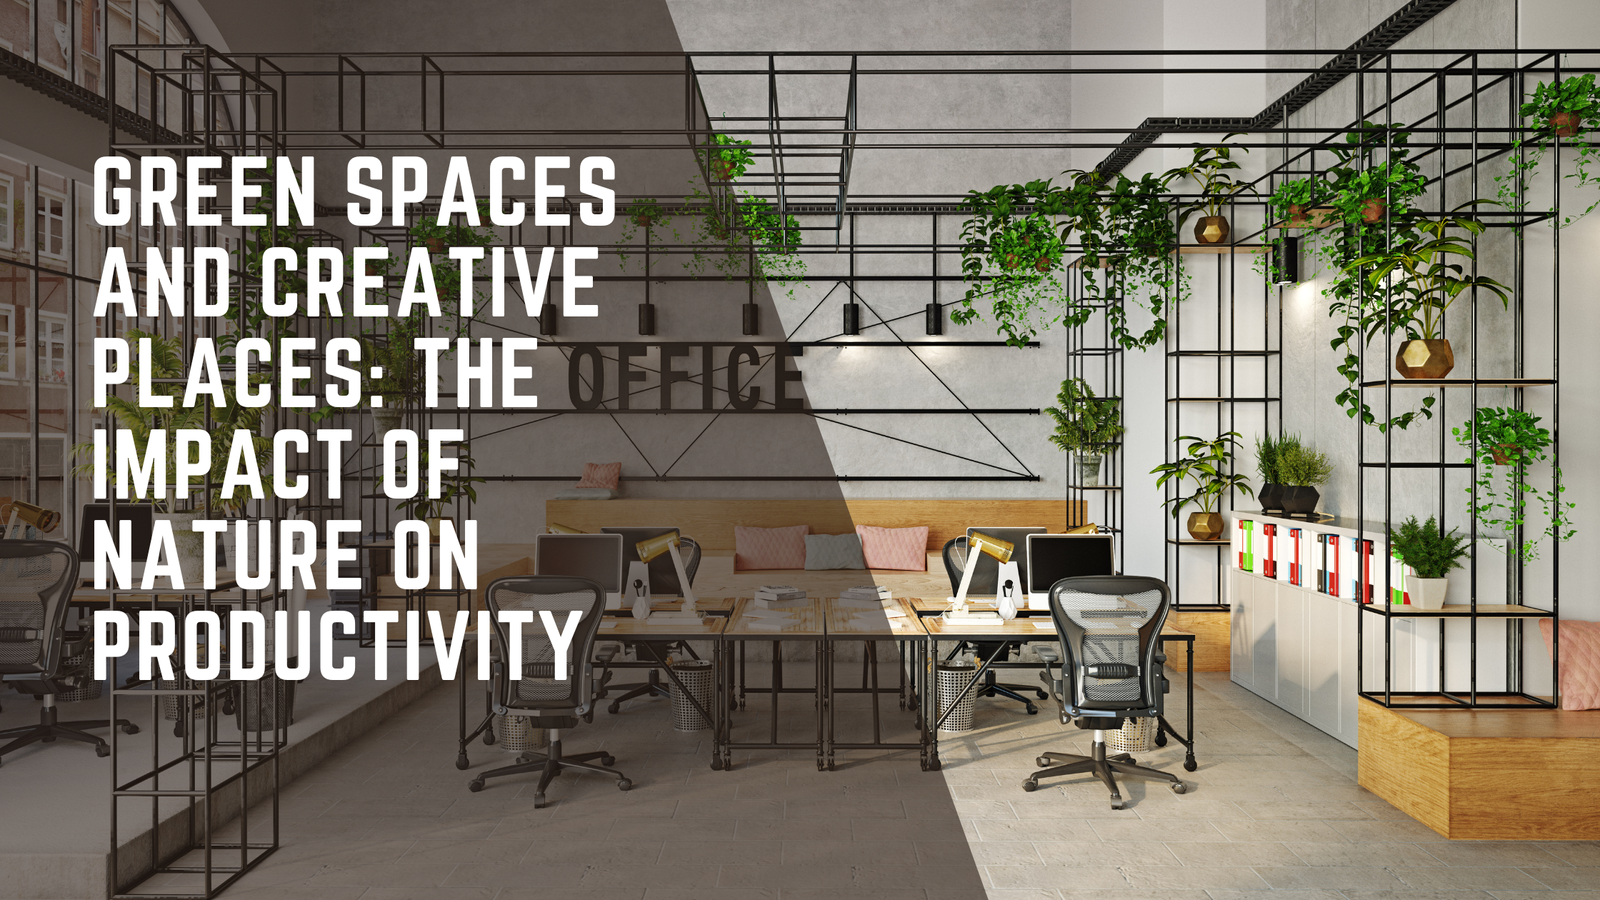 Green Spaces and Creative Places: The Impact of Nature on Productivity